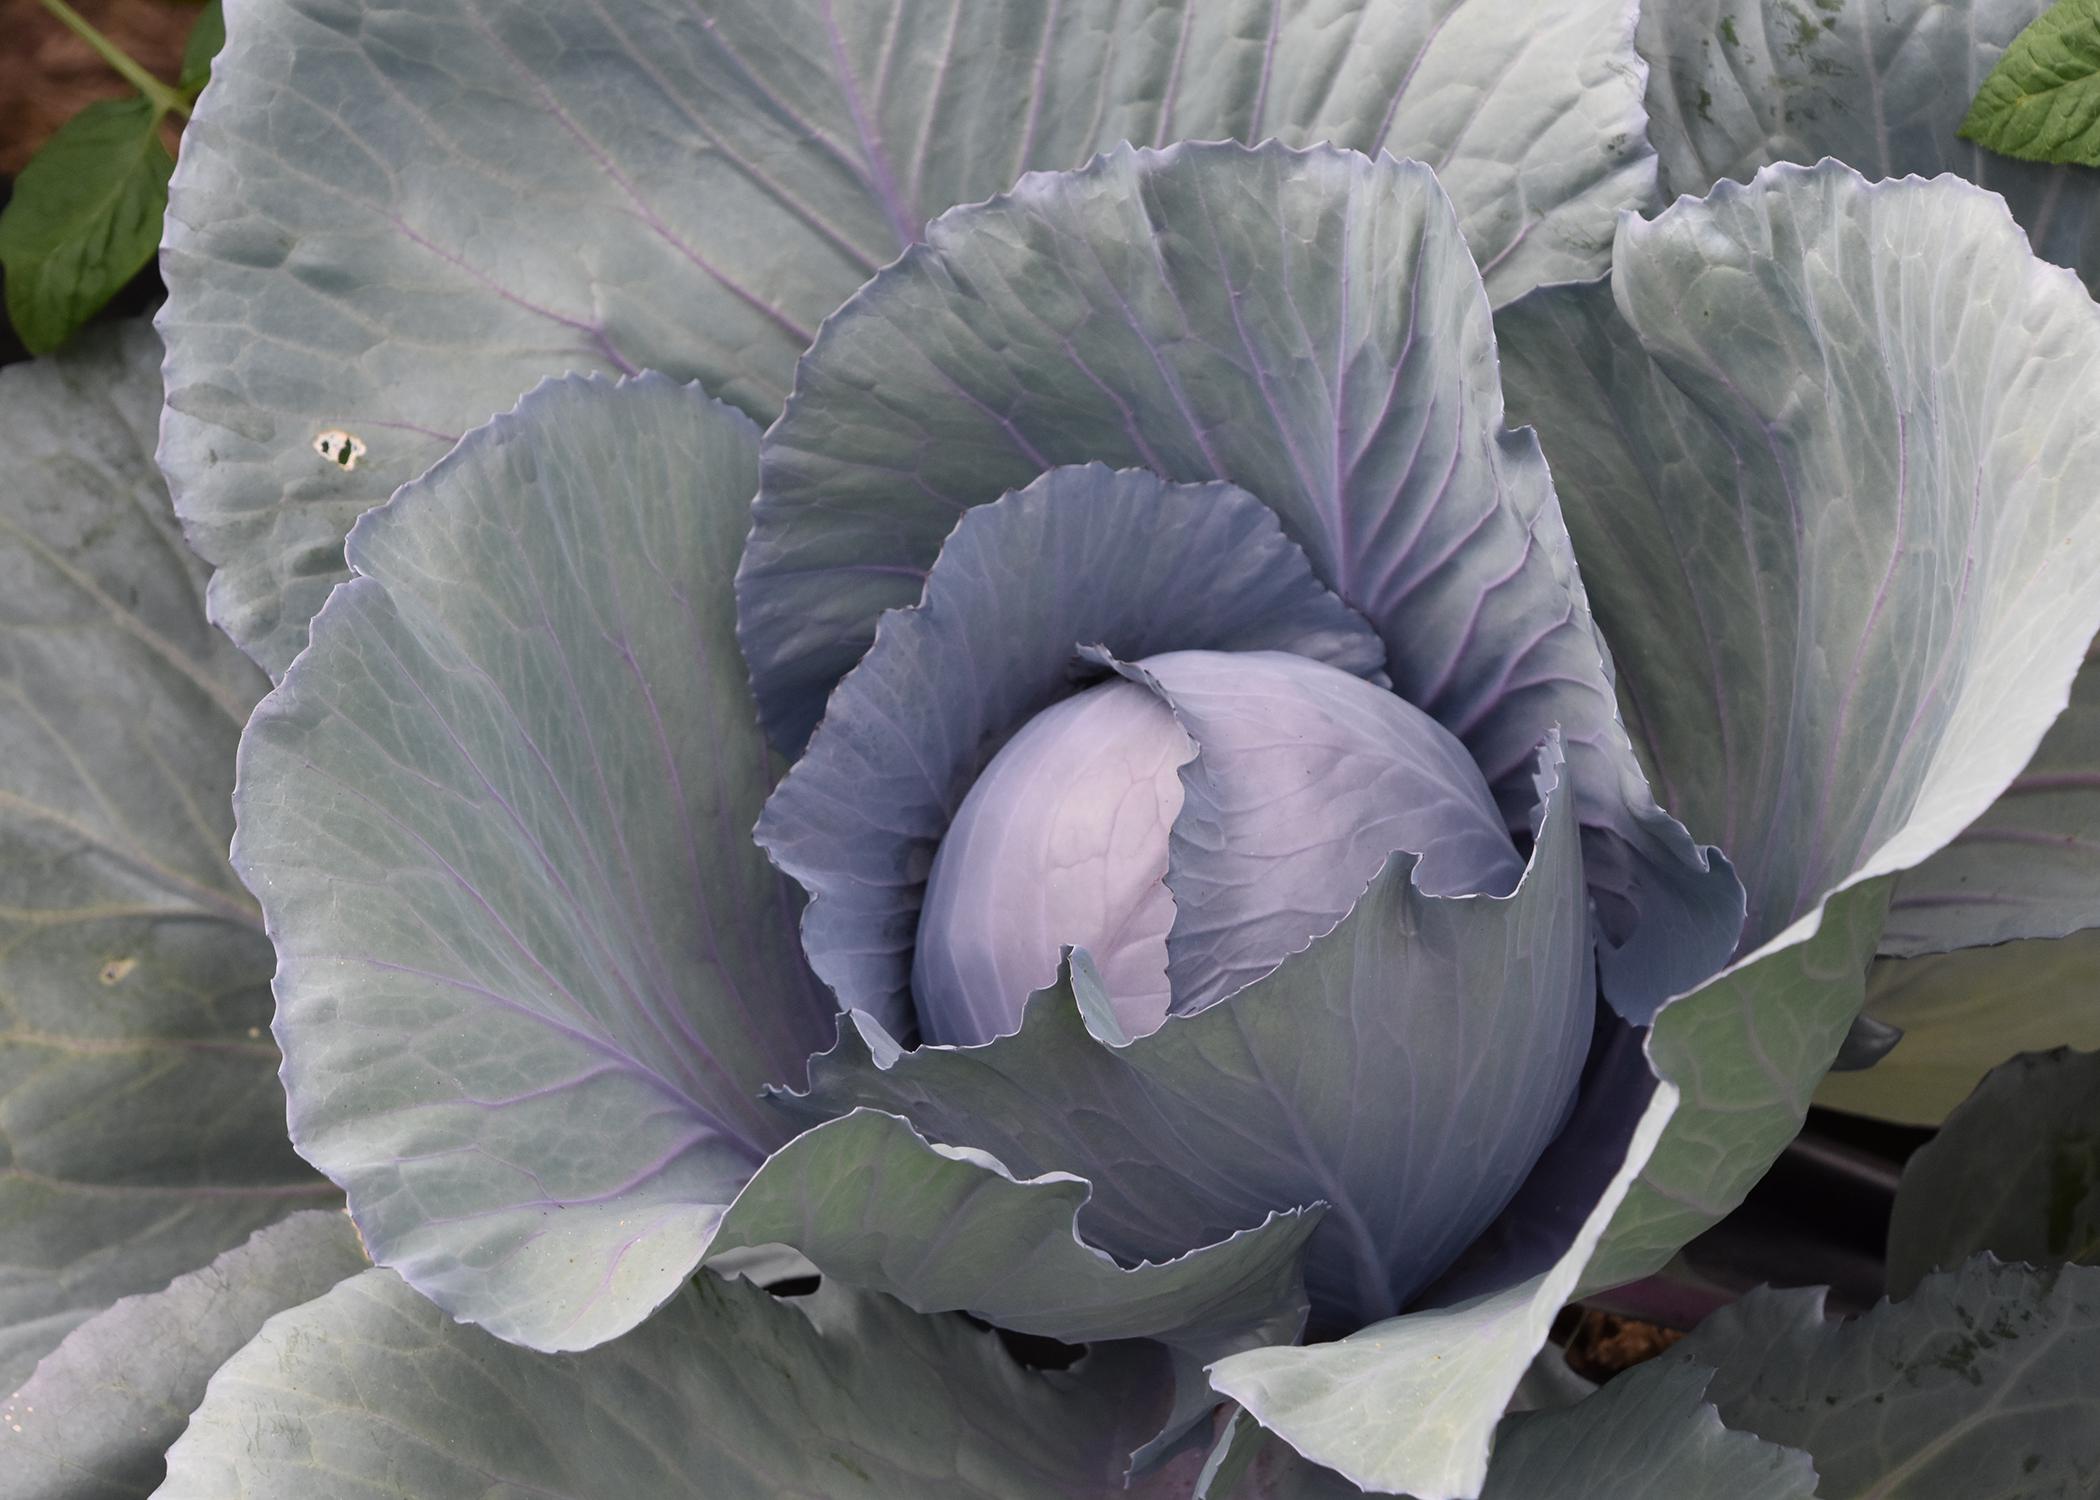 A head of cabbage grows in a garden.